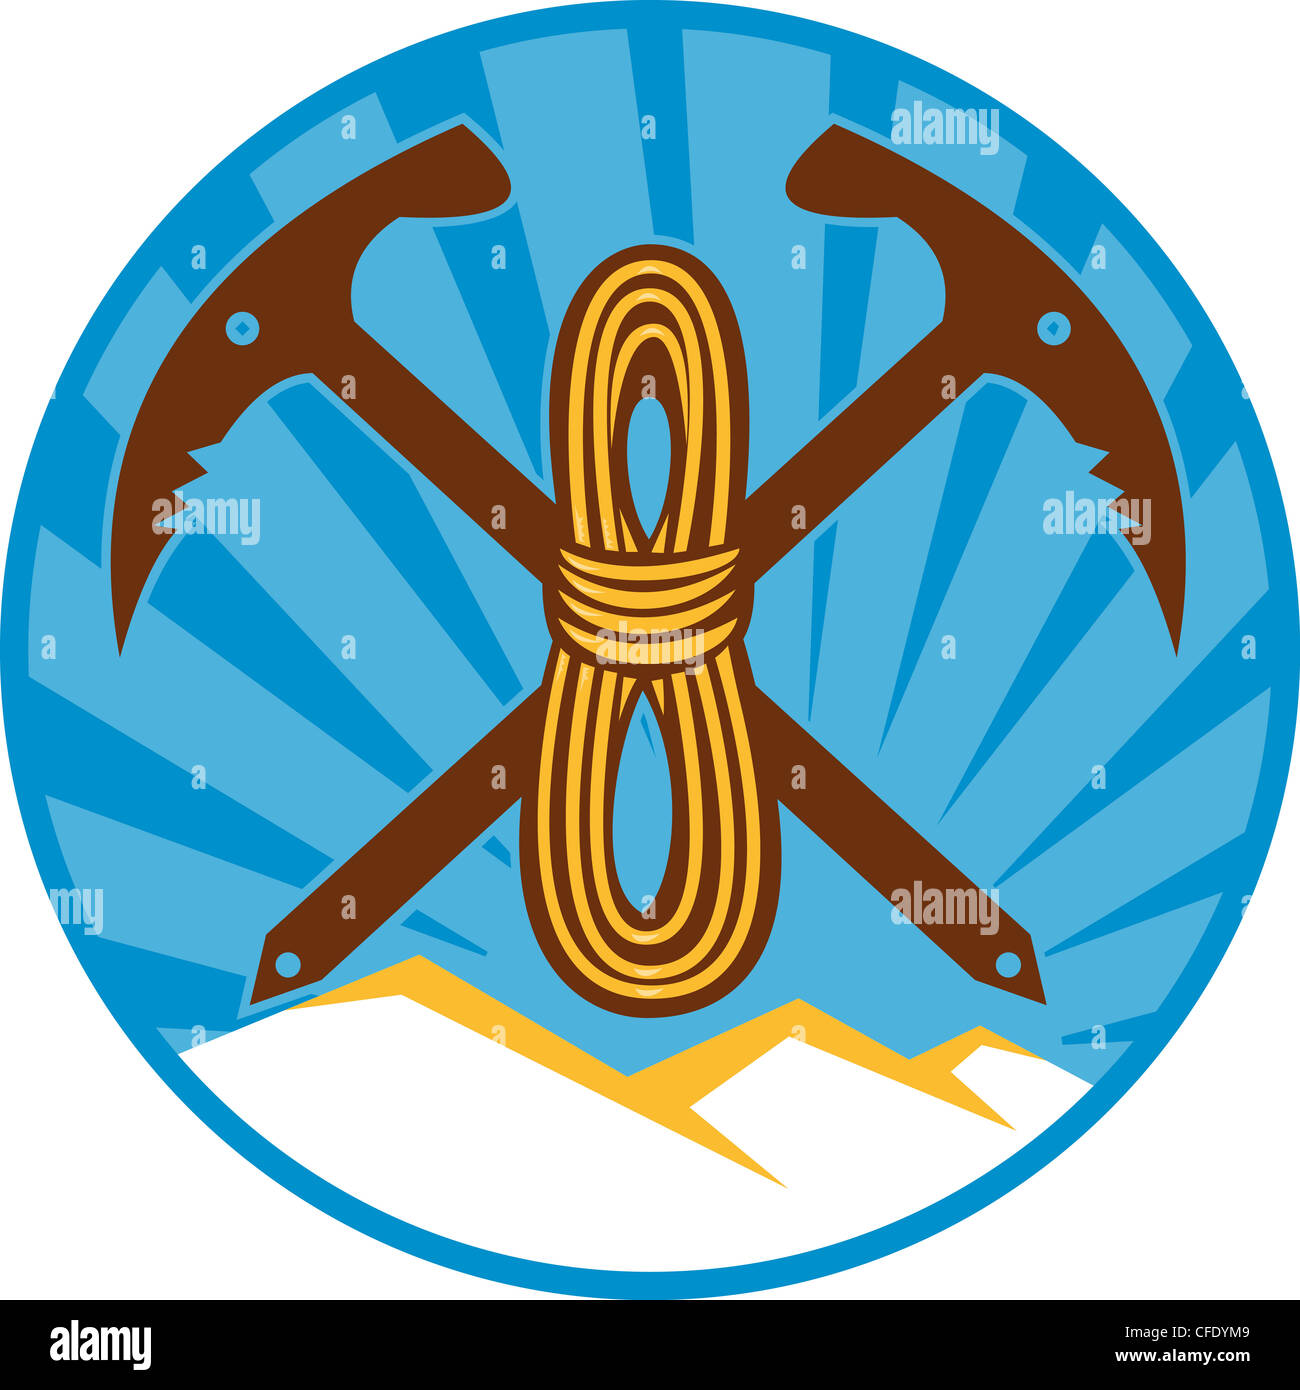 Illustration of a pick axe with rope mountains in the background set inside circle done in retro style Stock Photo